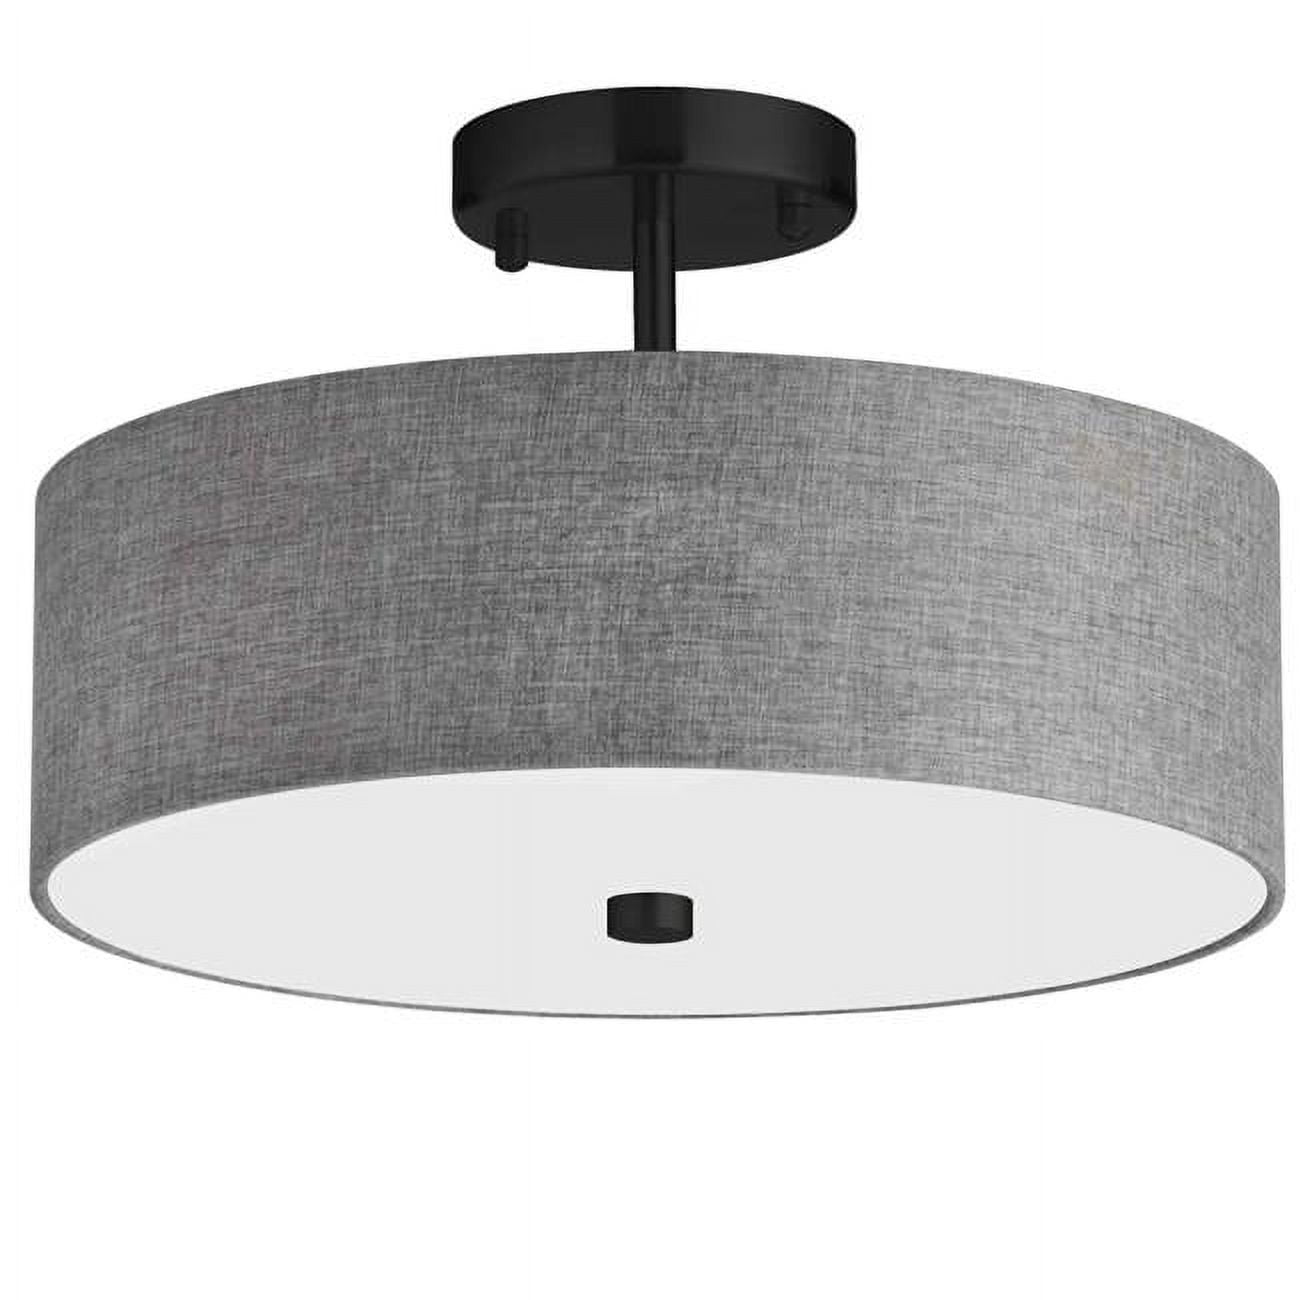 Picture of Dainolite 571-143SF-MB-GRY 3 Light Incandescent Matte Black Semi-Flush Fixture with Grey Shade